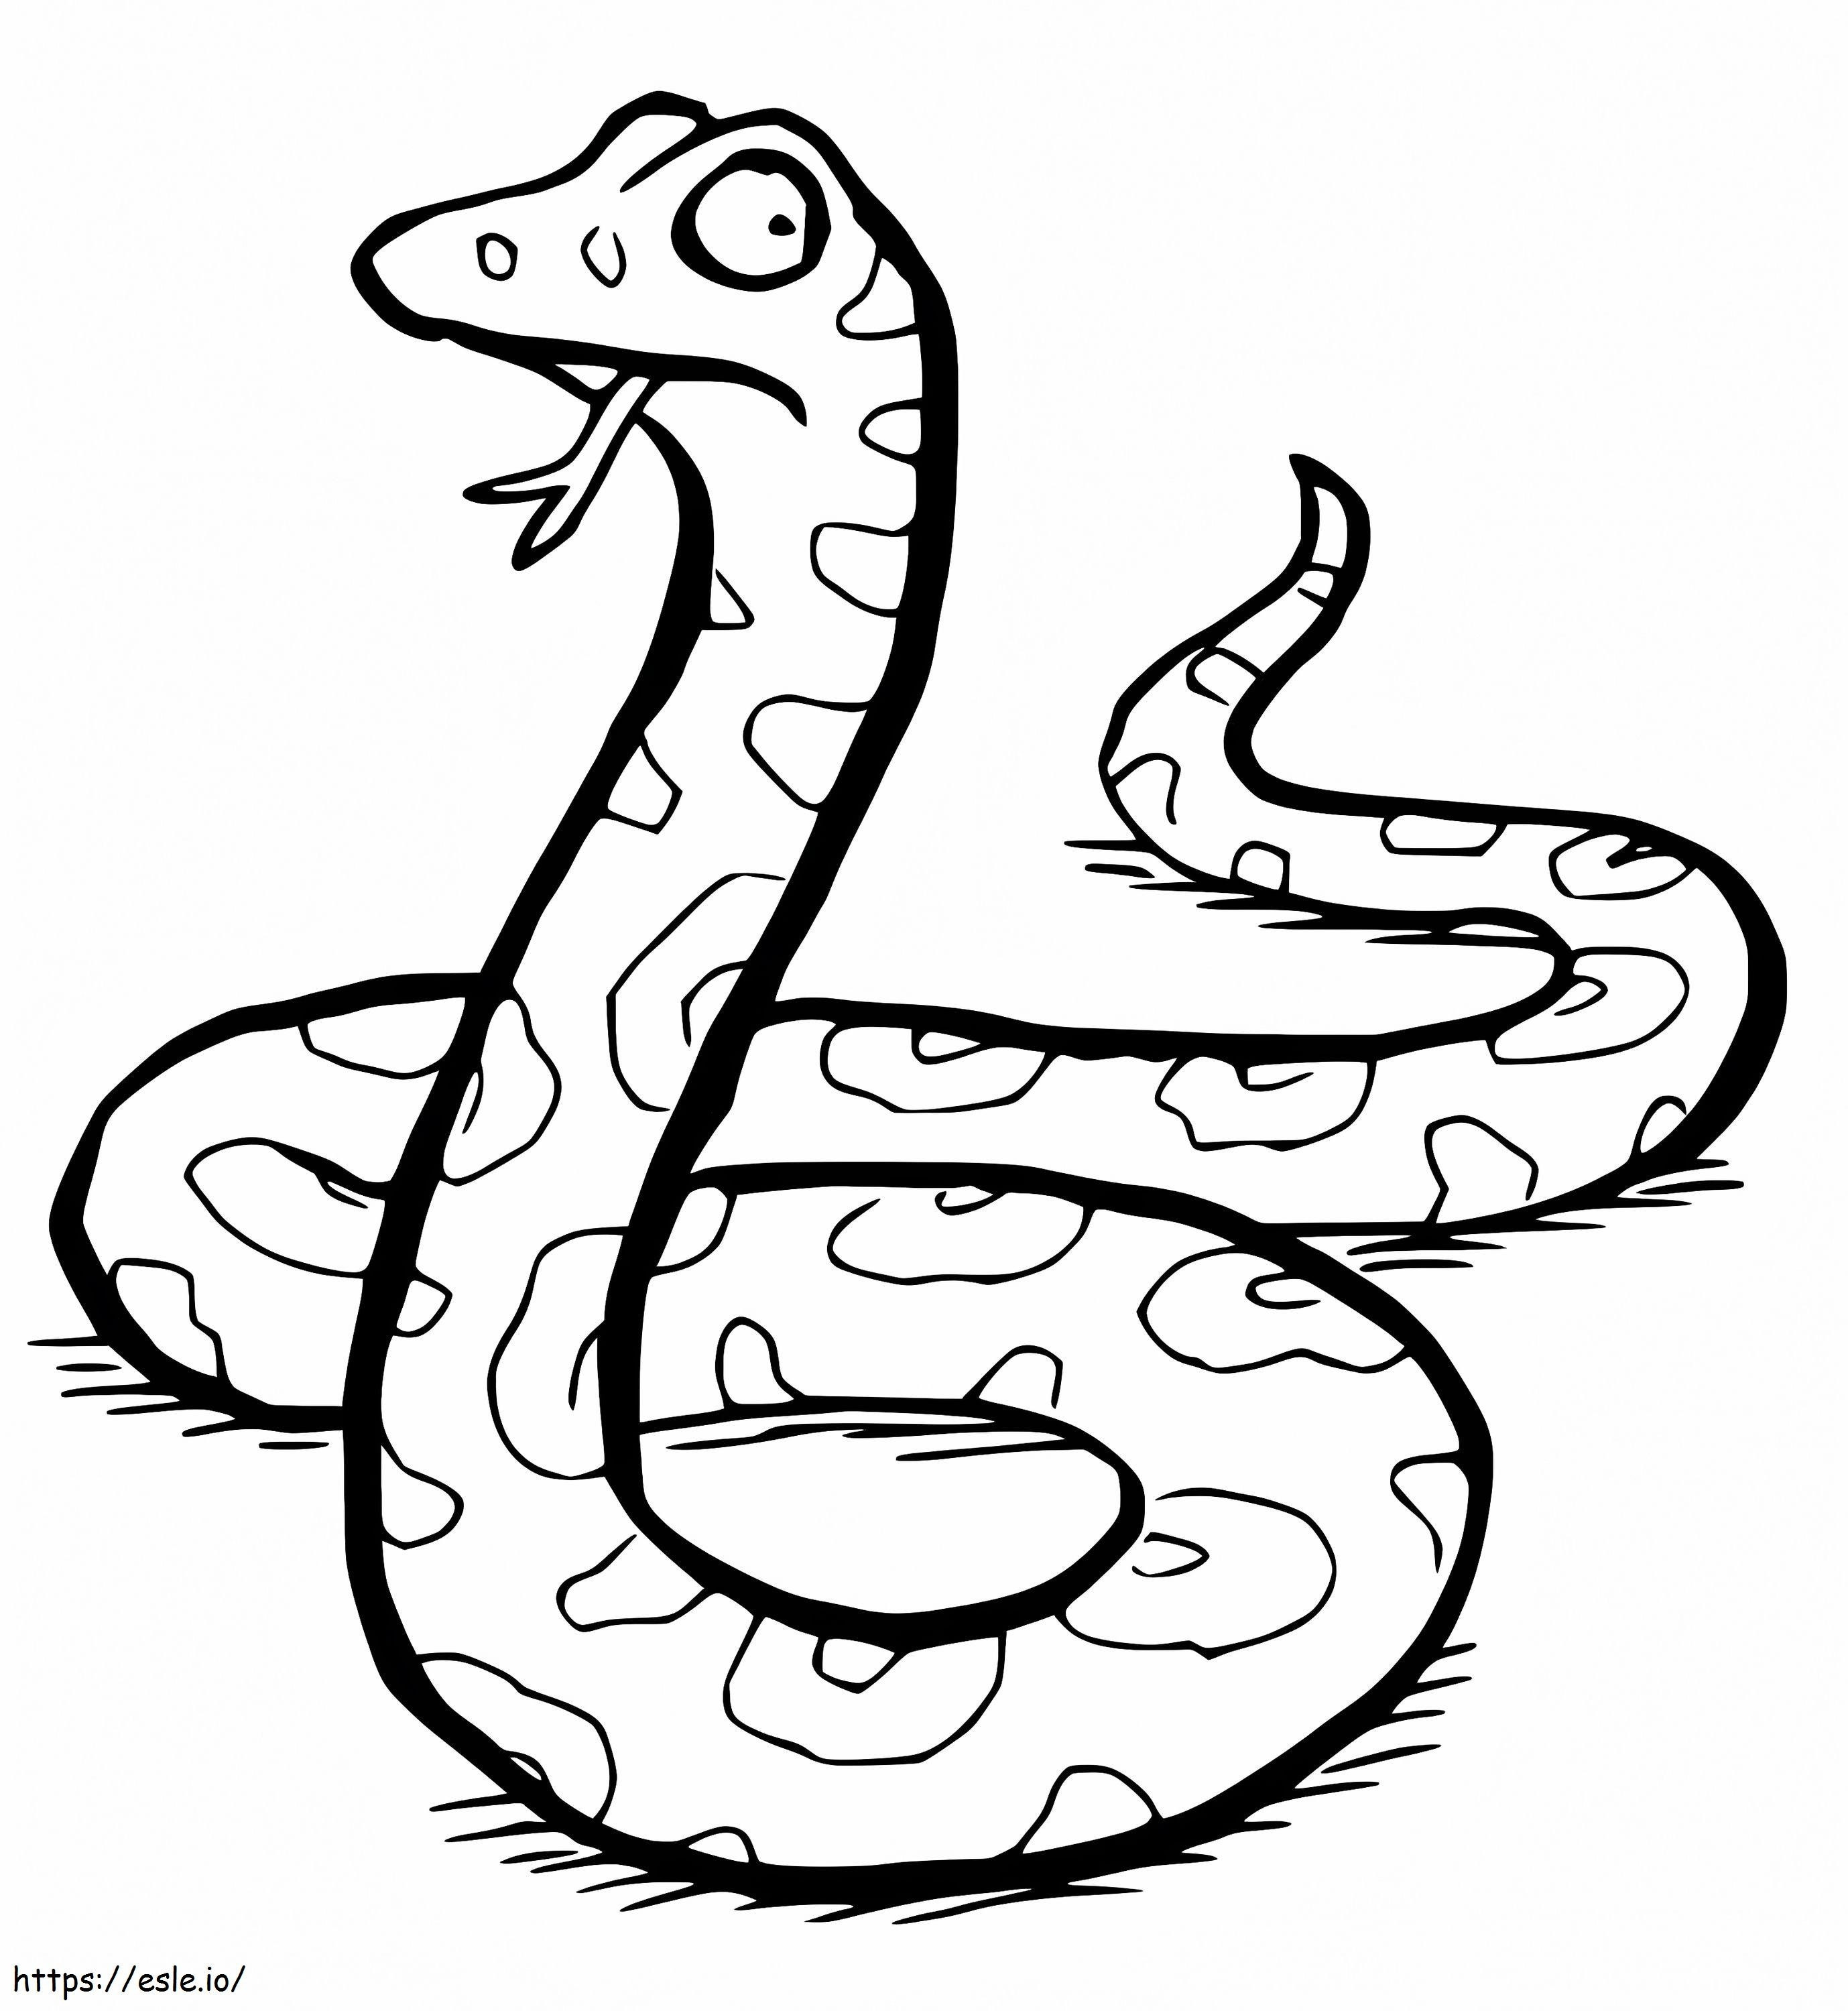 Snake From Gruffalo coloring page